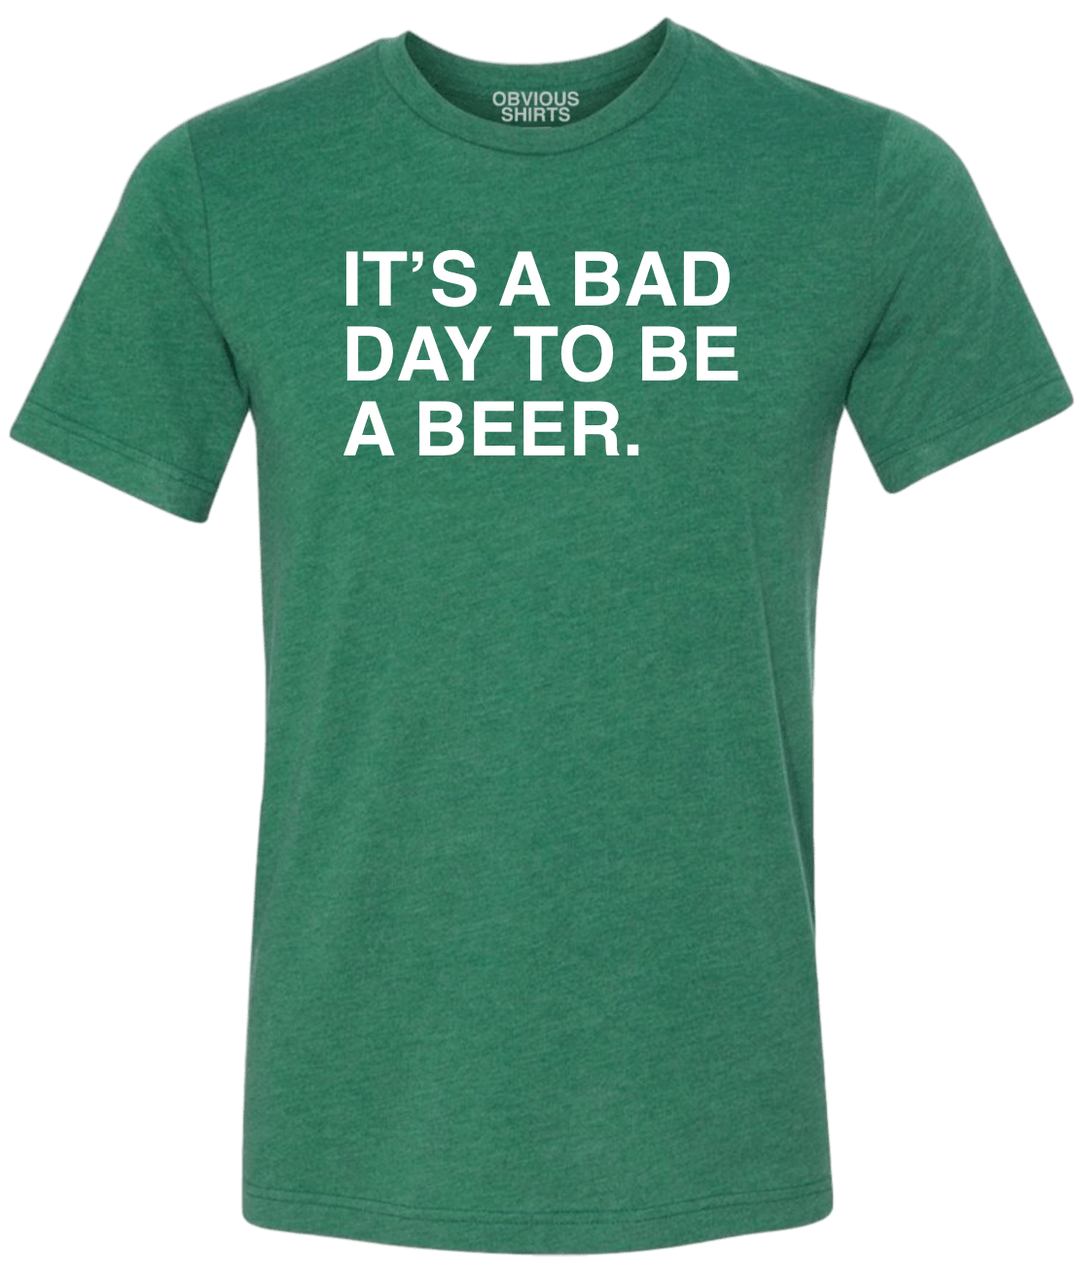 IT'S A BAD DAY TO BE A BEER. - OBVIOUS SHIRTS